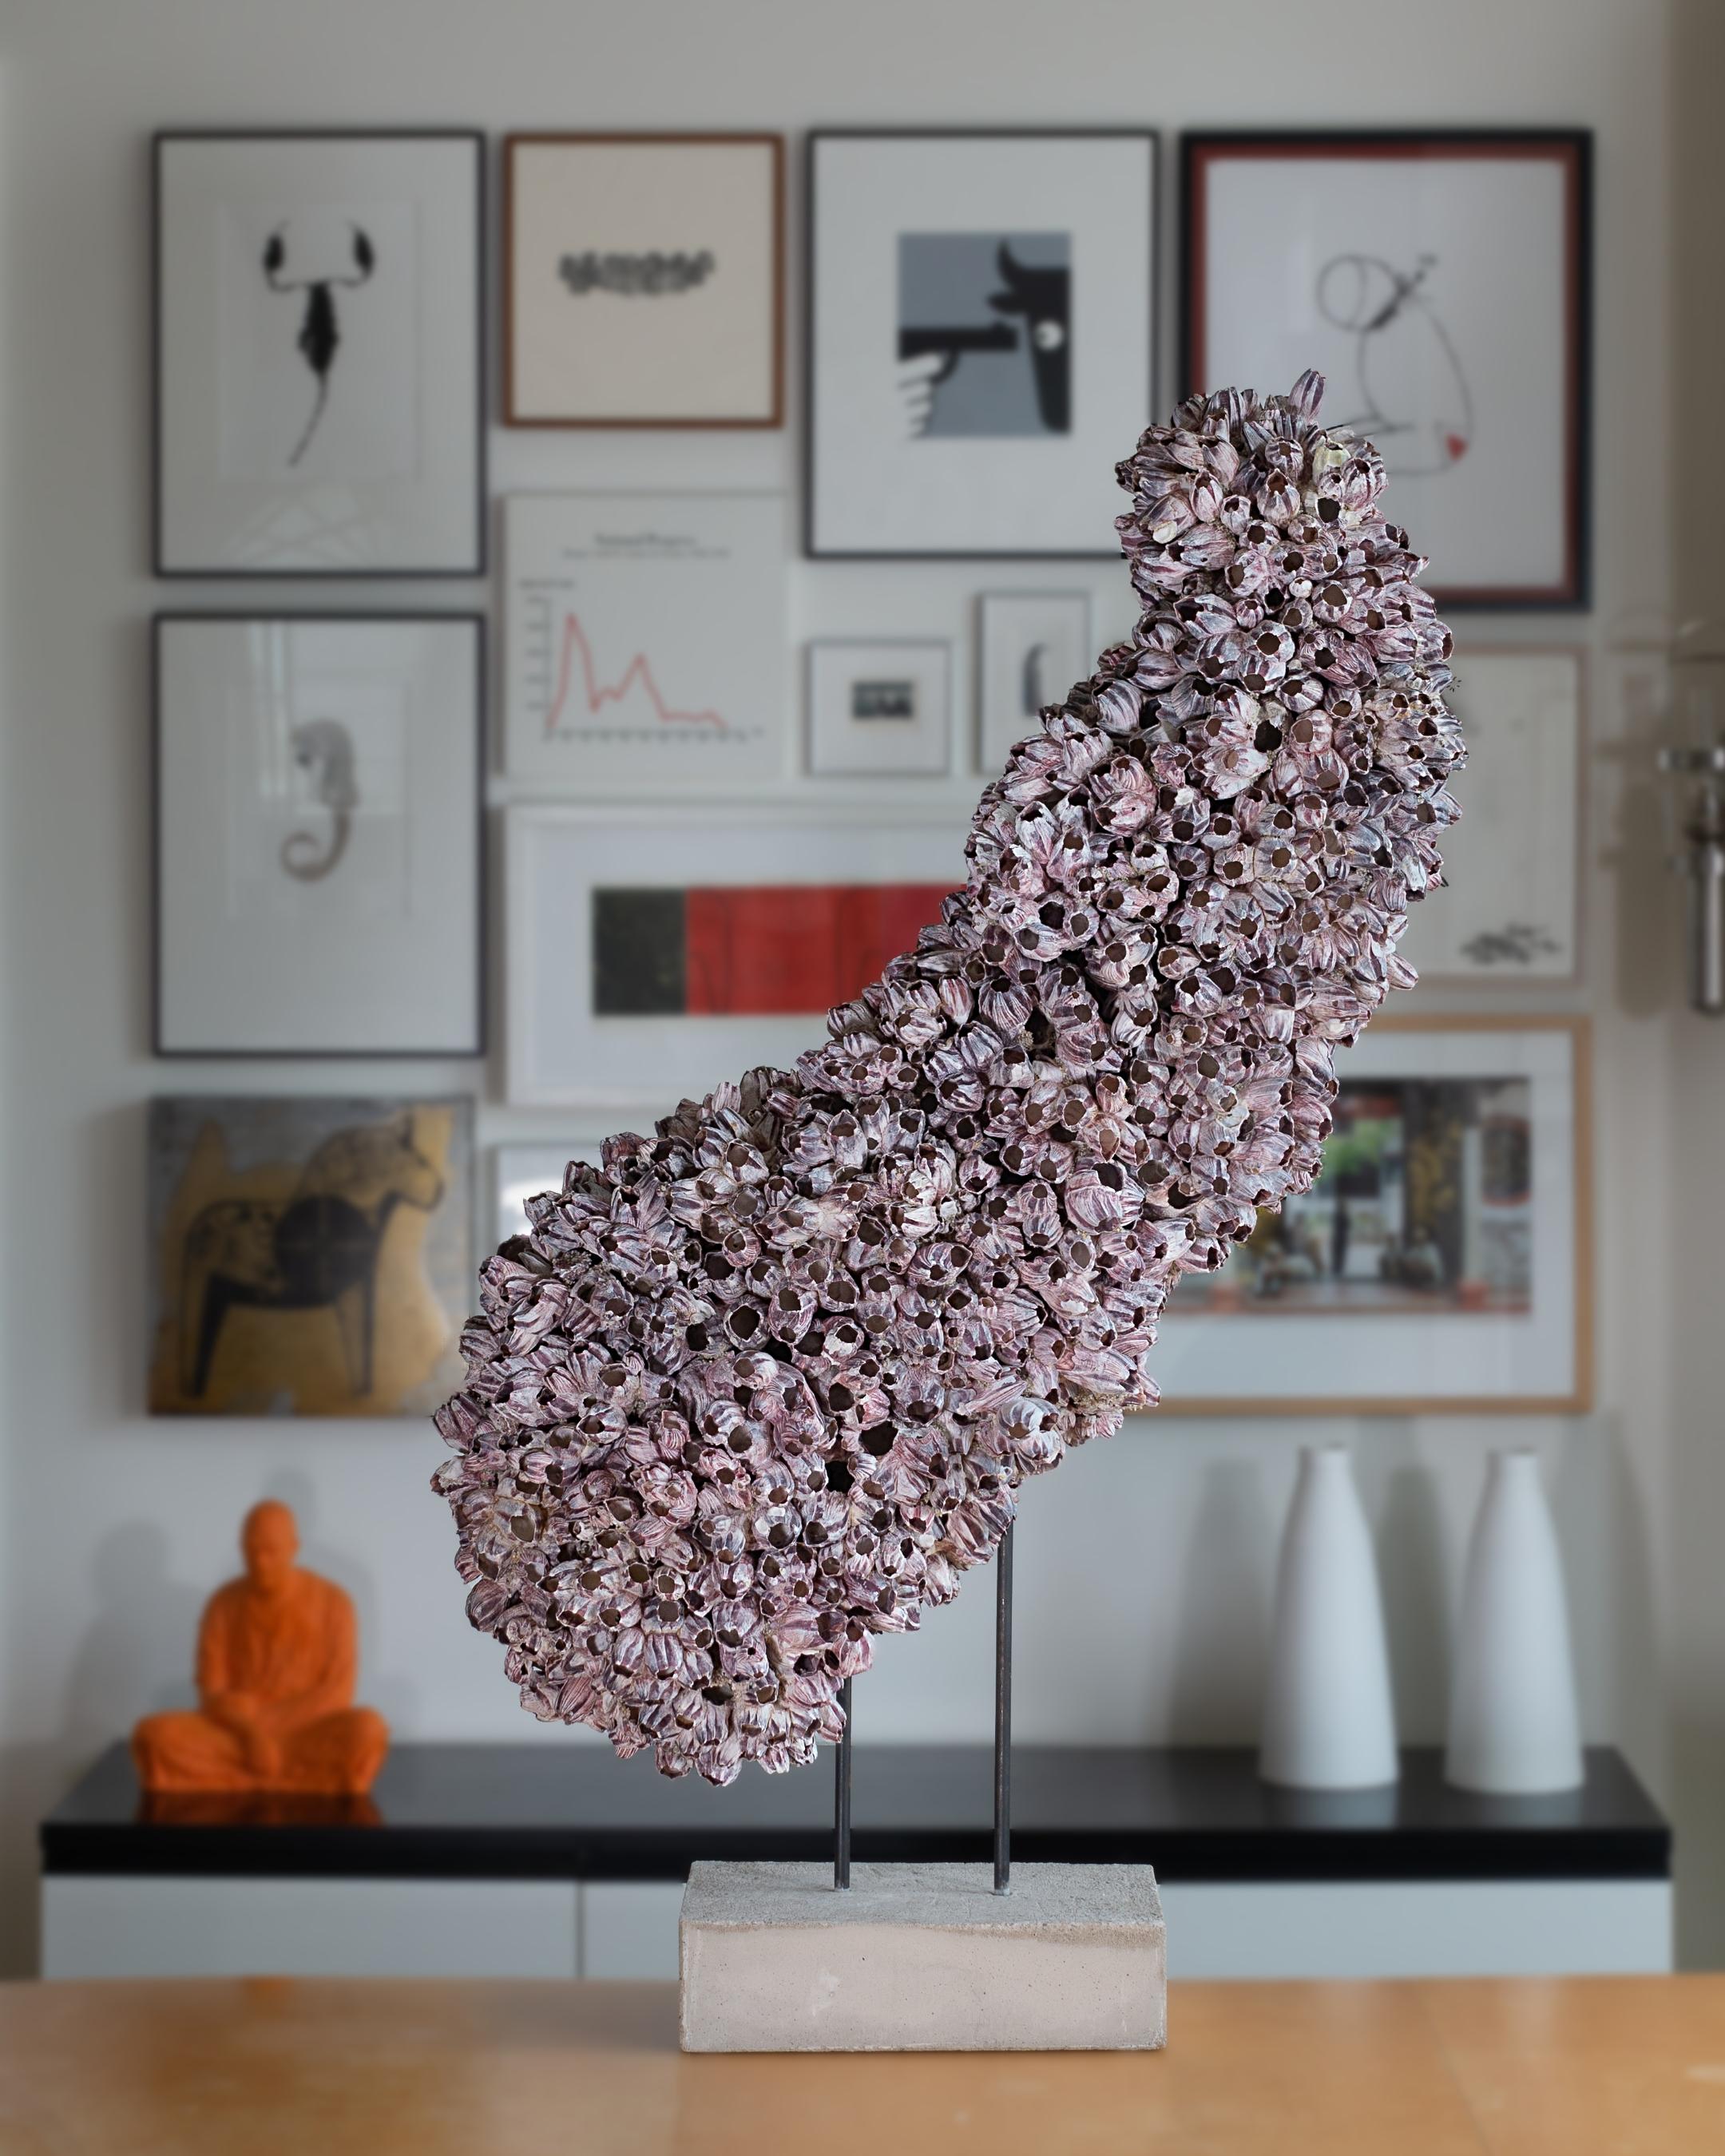 Morning Glory – unique free-standing barnacle sculpture by Shellman Scandinavia.

Morning Glory is a potent, free-standing sculpture with small clusters of Papua New Guinea barnacles carefully put together by hand, one by one. After four weeks on